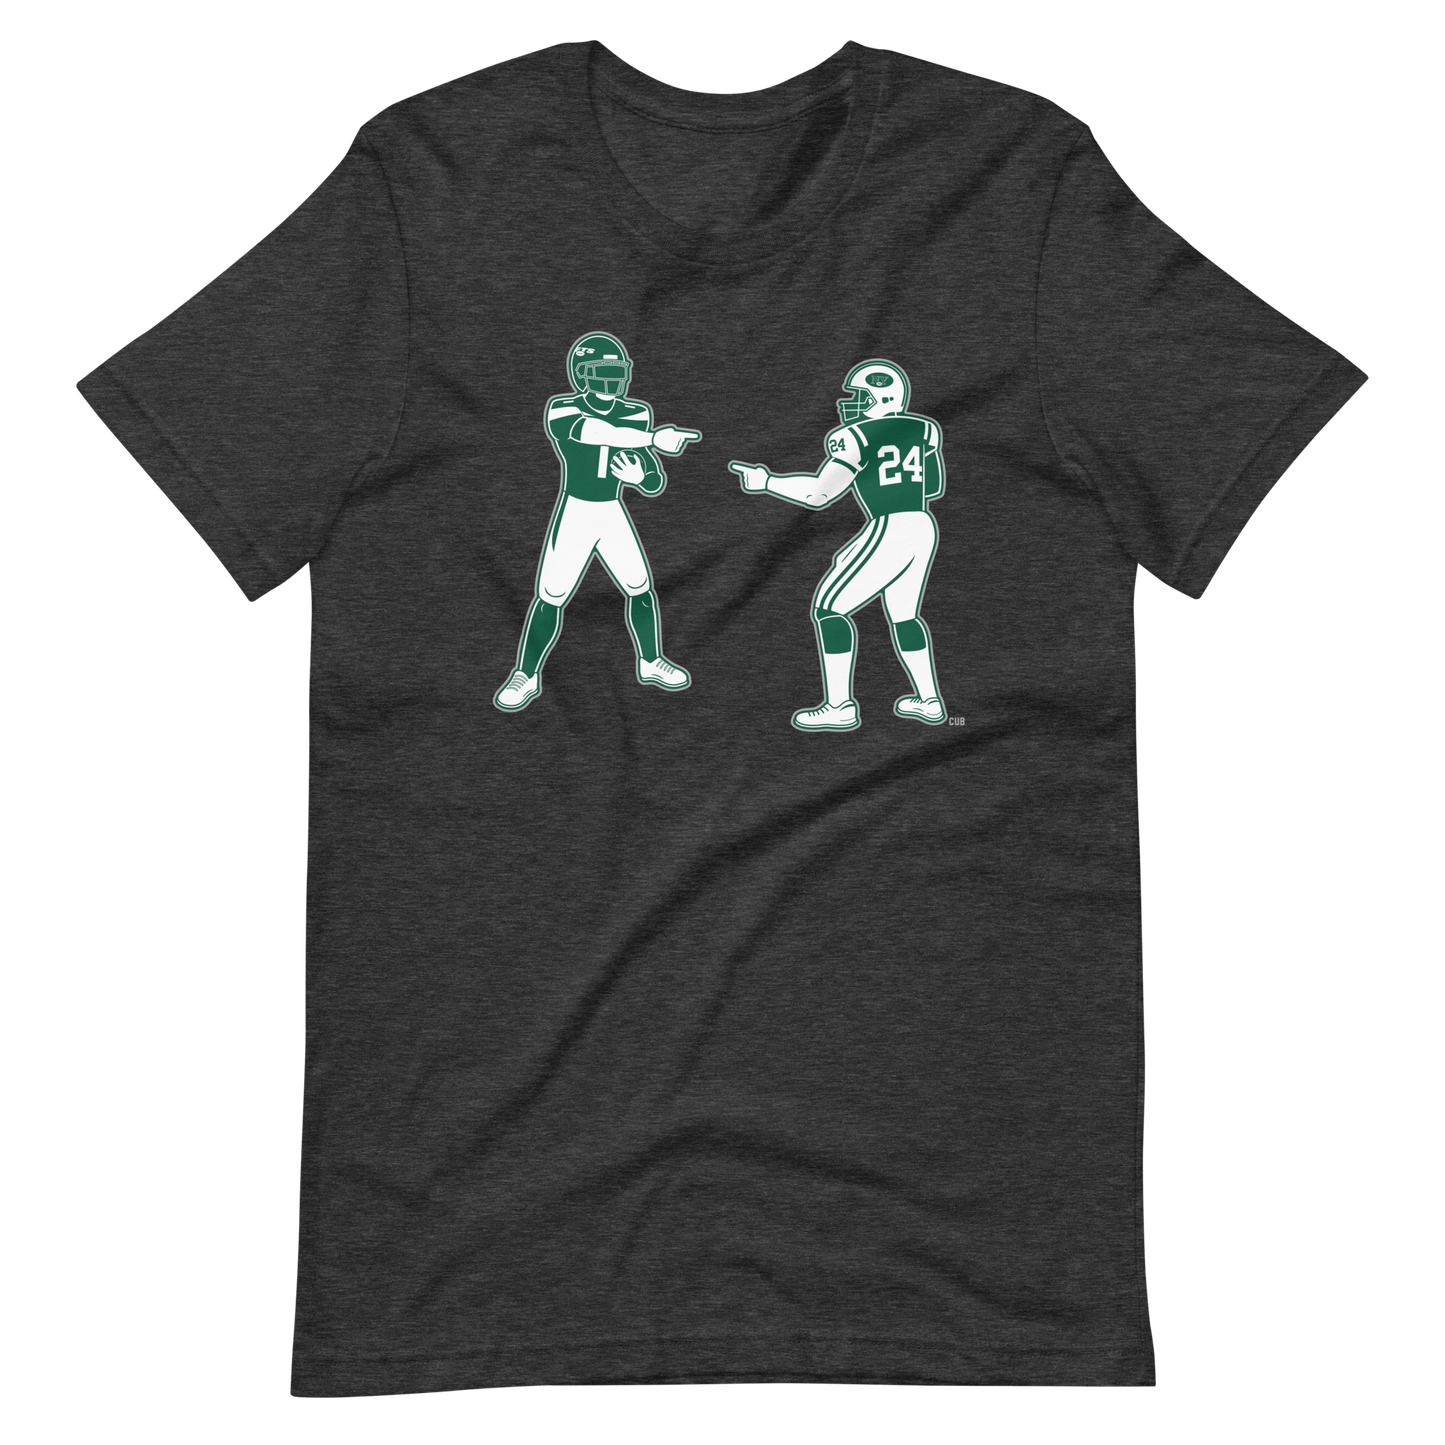 Sauce and Revis Jets T-Shirt